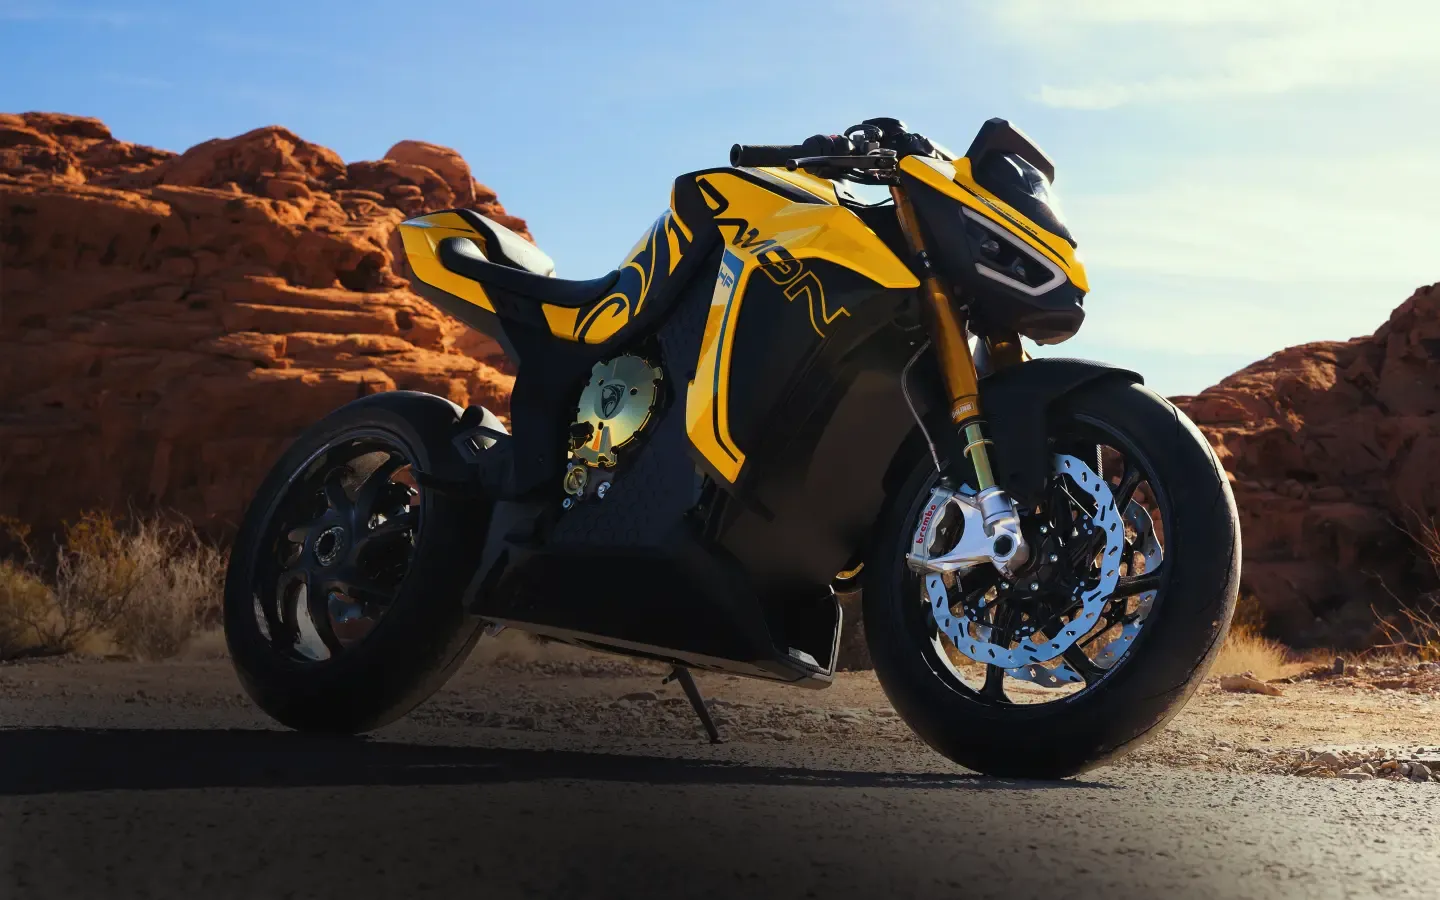 This pedal powered electric motorcycle is a great innovation! 